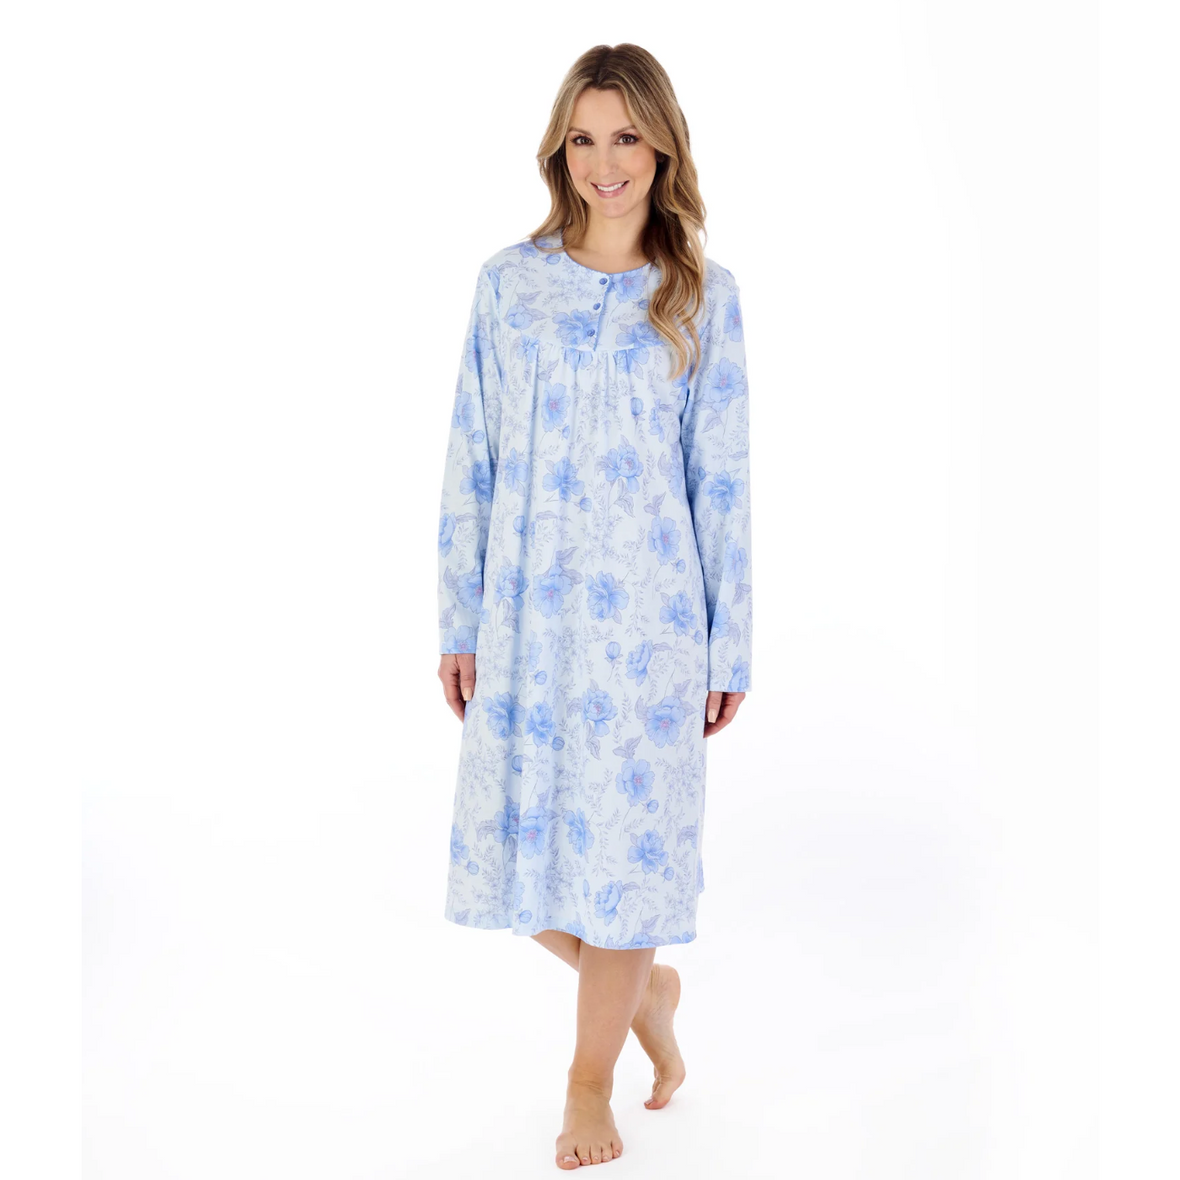 A model smiling while wearing the Slenderella Picot Trim Jersey Nightdress in Blue